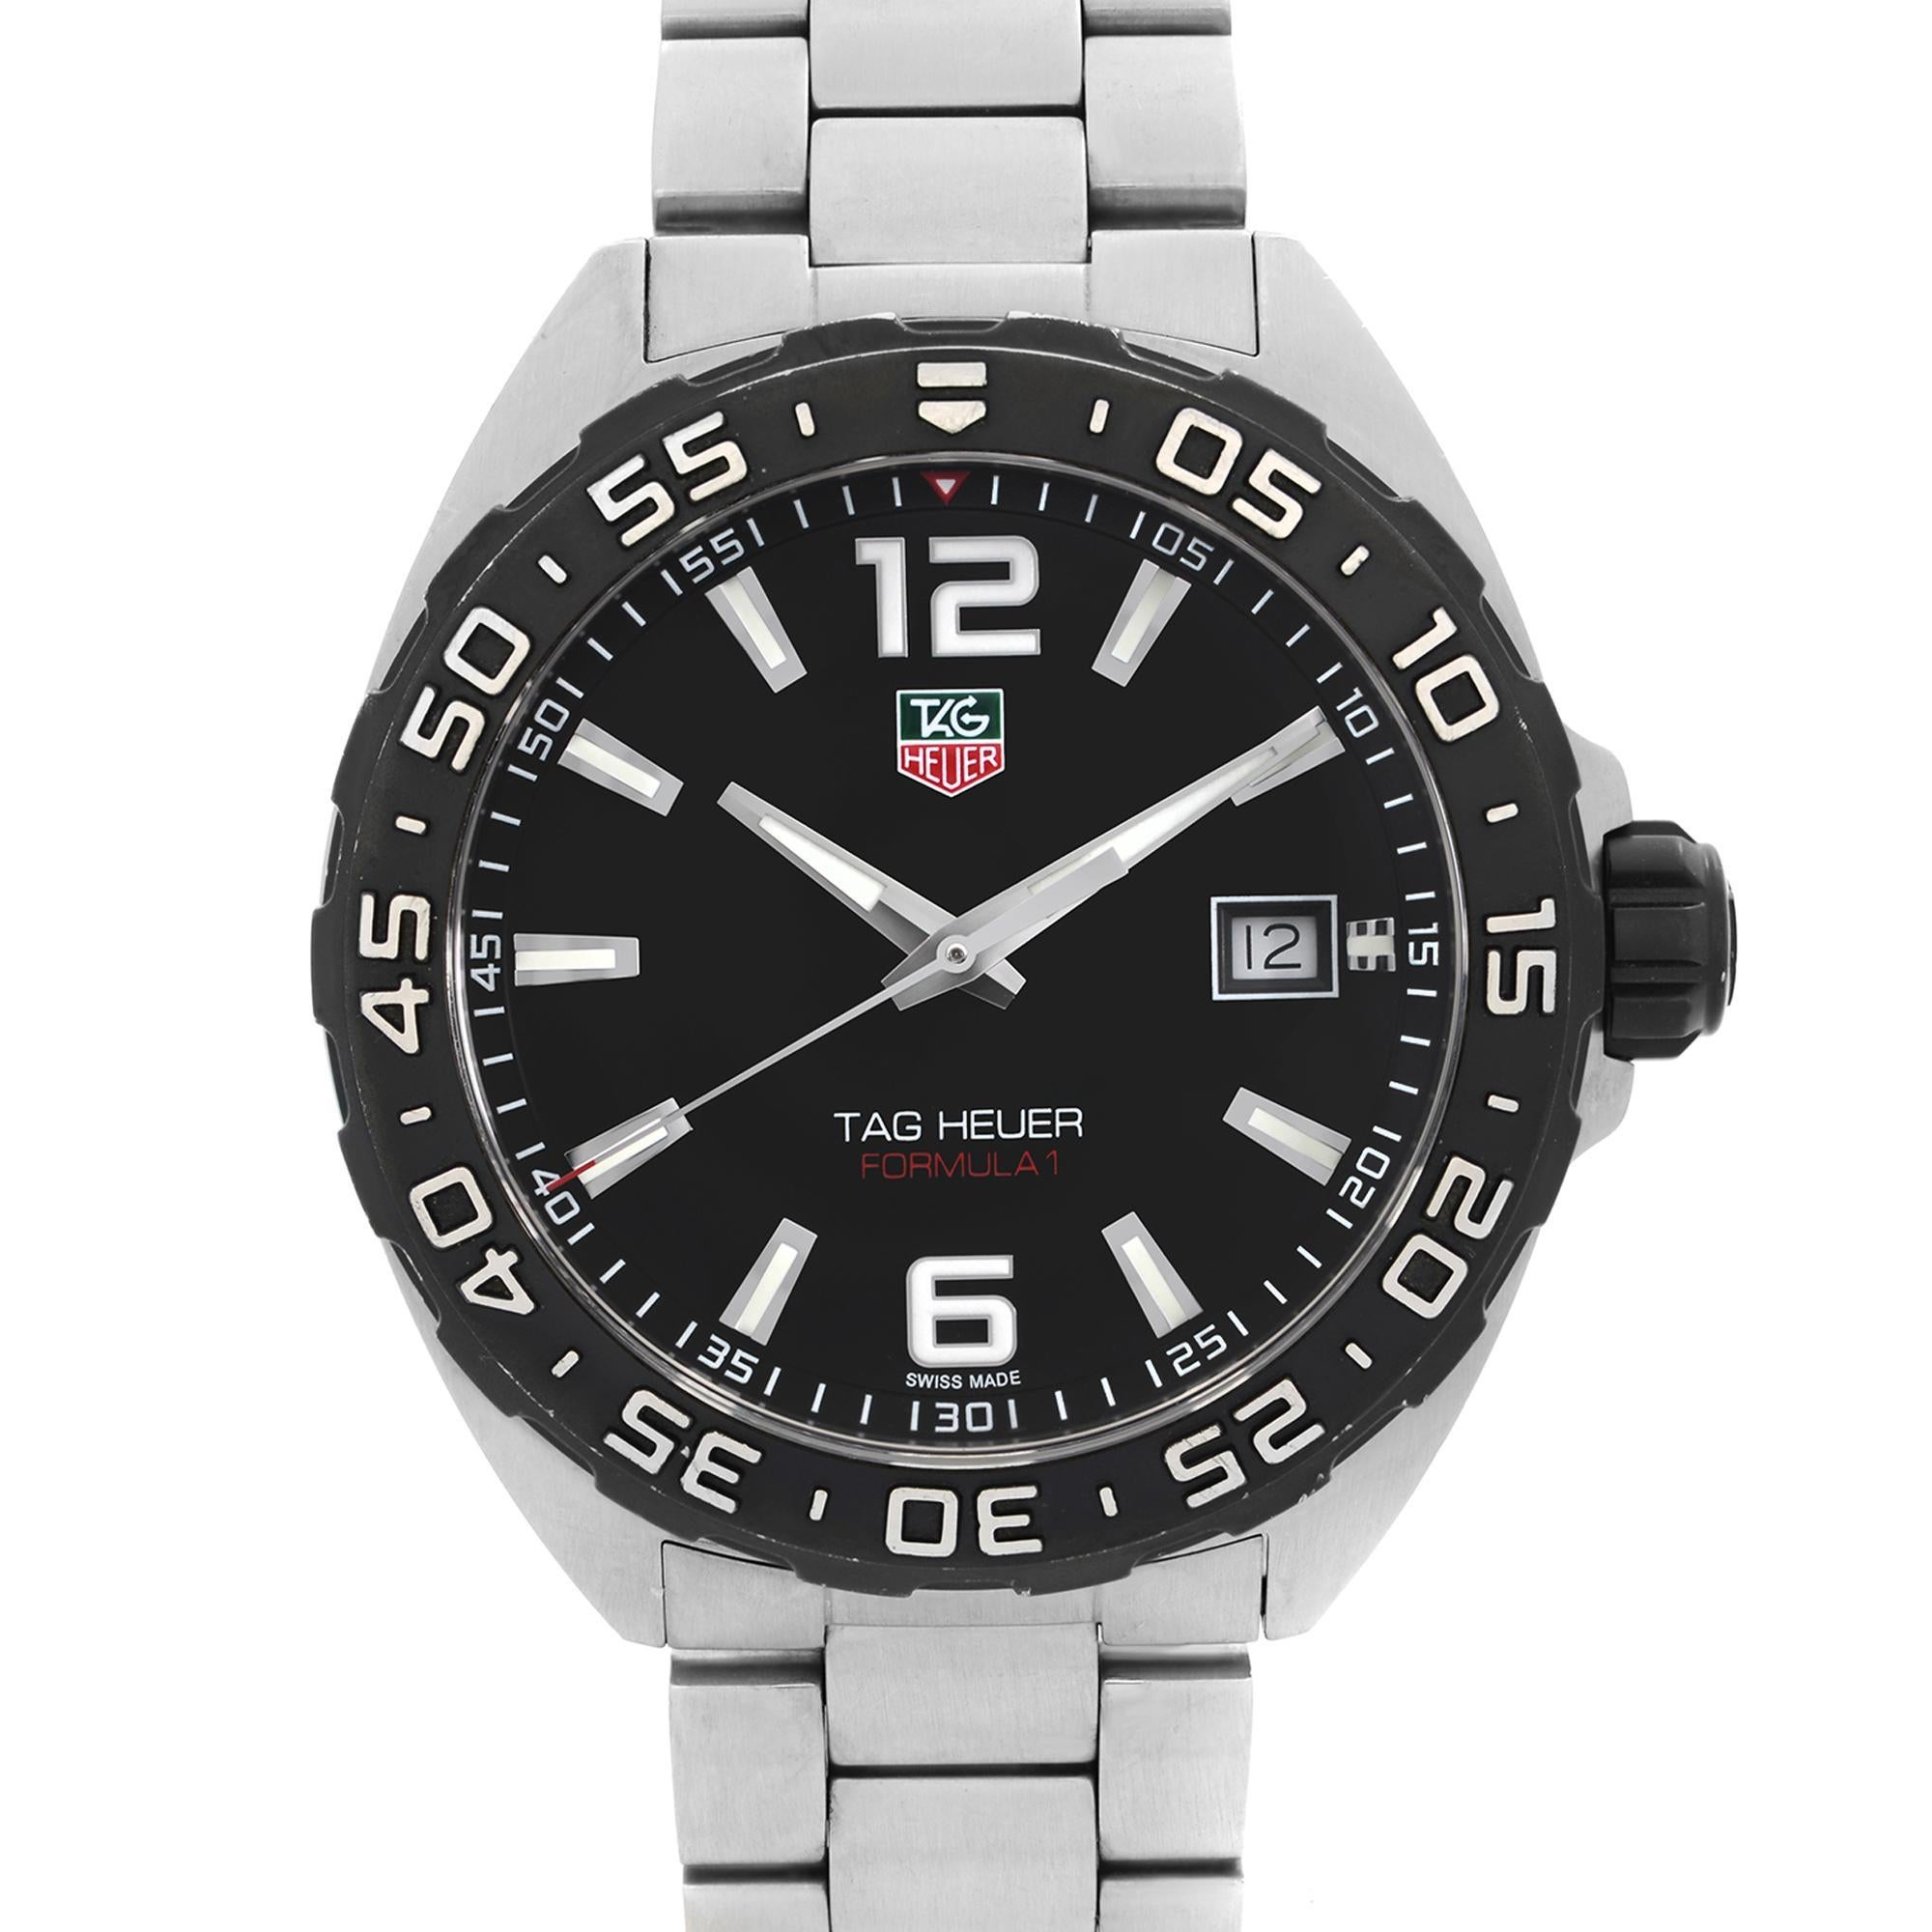 Pre owned Tag Heuer Formula 1 41mm Steel Date Black Dial Men's Quartz Watch WAZ.110.BA08. Minor Nicks and scratches on the Bezel Under Closer Inspection. This Timepiece is Powered by a Quartz Movement and Features: Stainless Steel Case with a